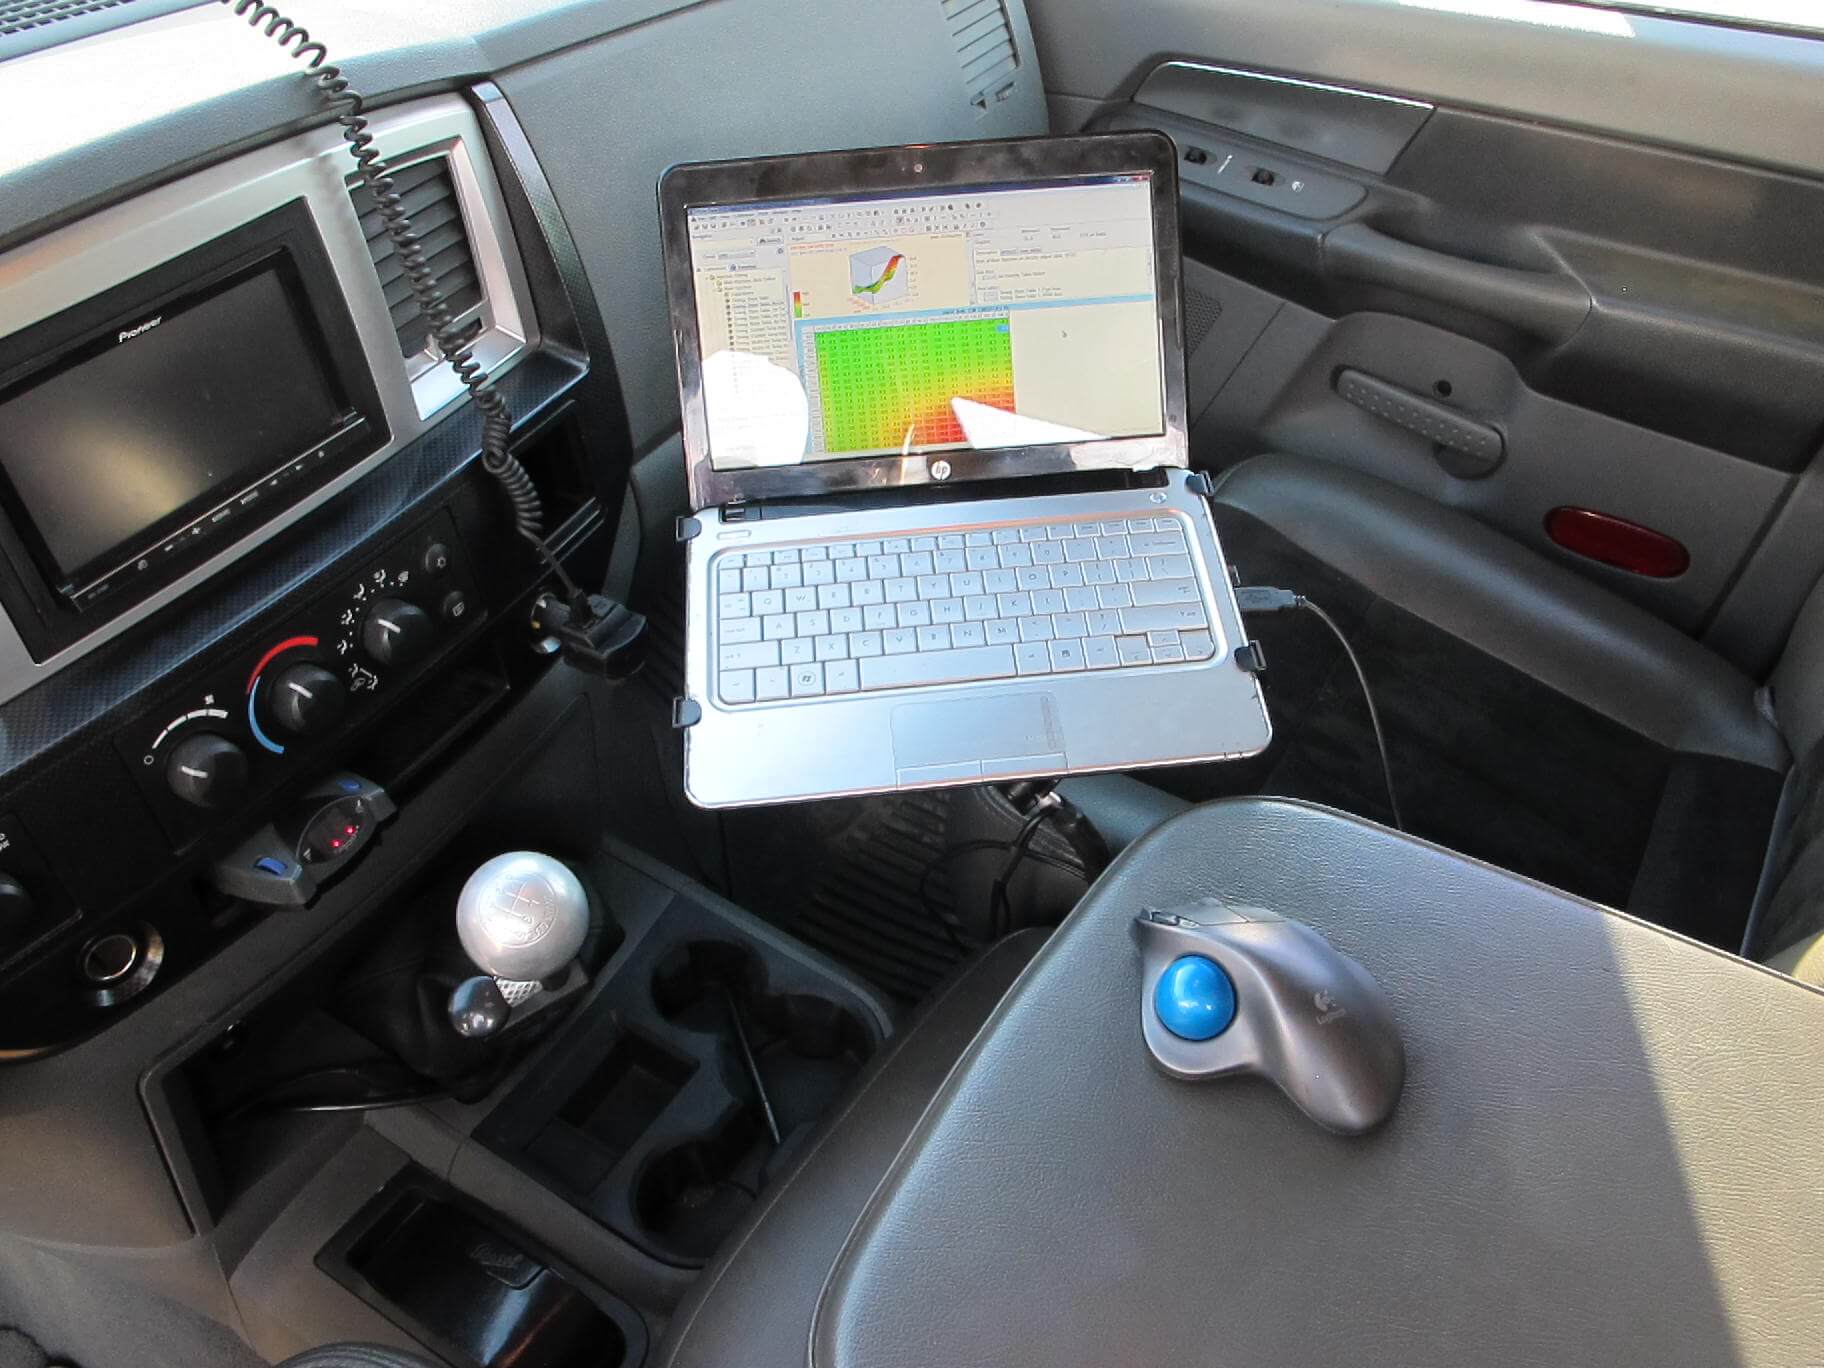 A laptop allows the owner real-time monitoring of the EFILive tuning.